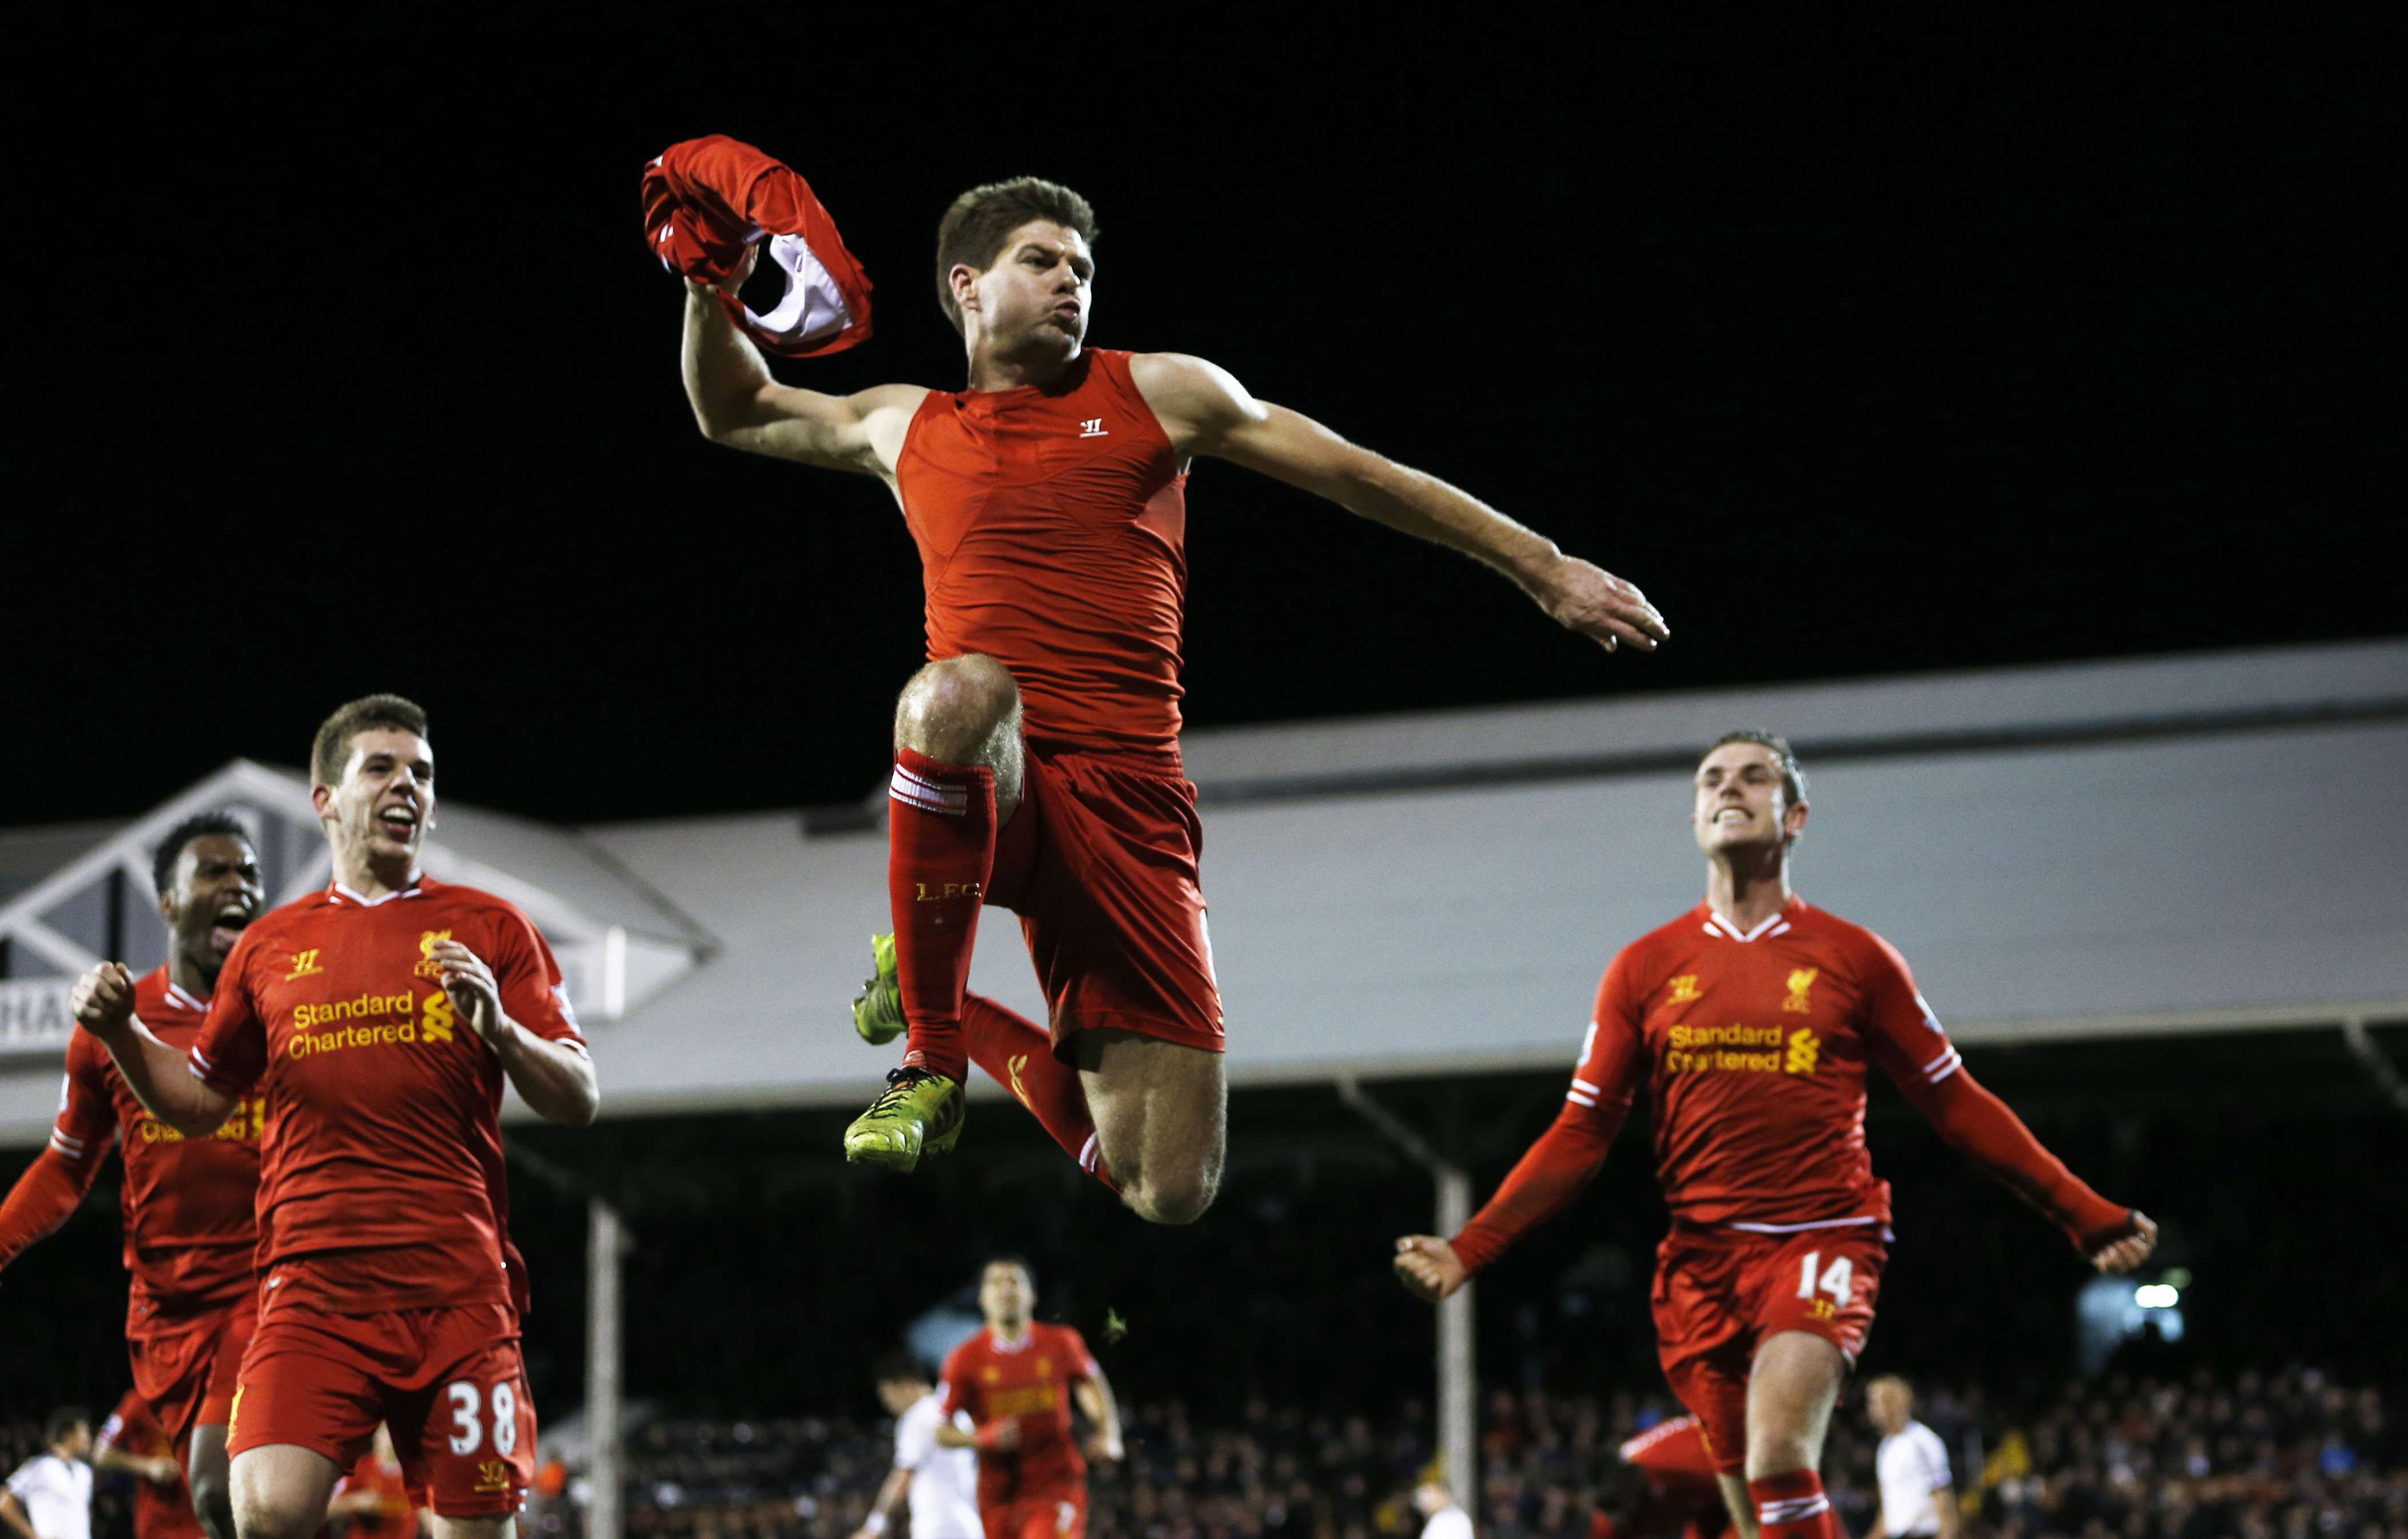 This emotional move could be perfect for Gerrard. FootballFanCast